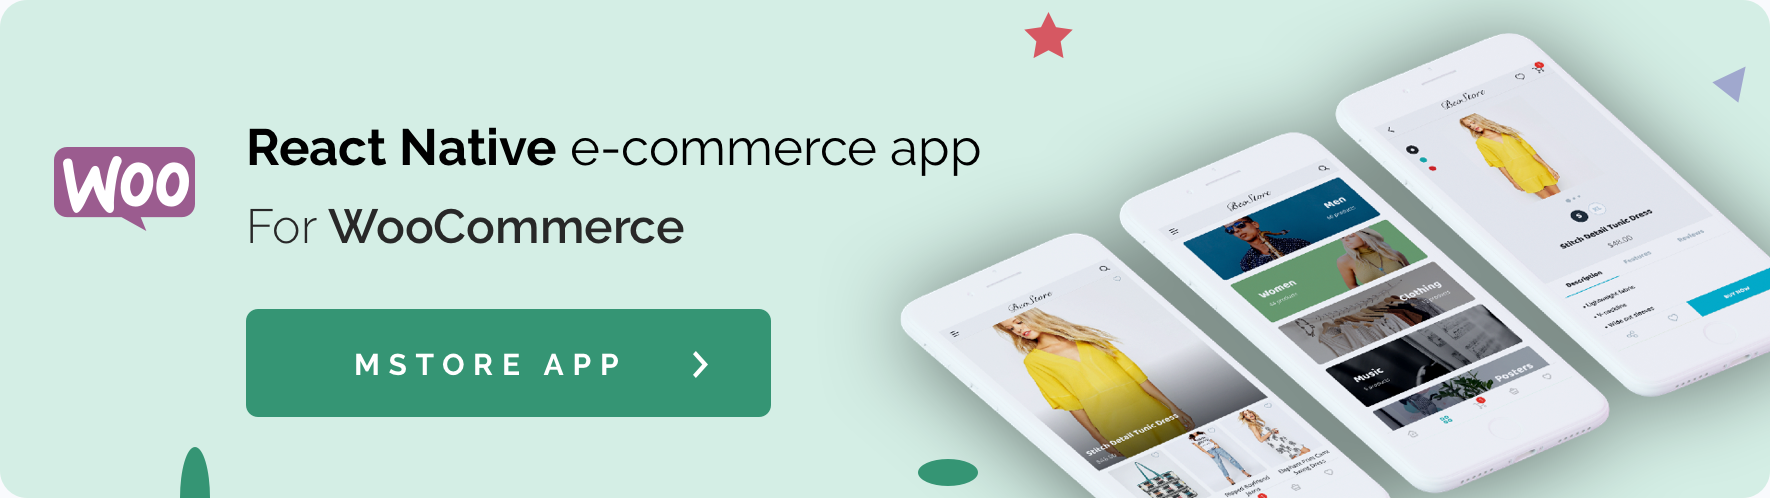 Mstore Expo - Complete React Native template for WooCommerce - 30